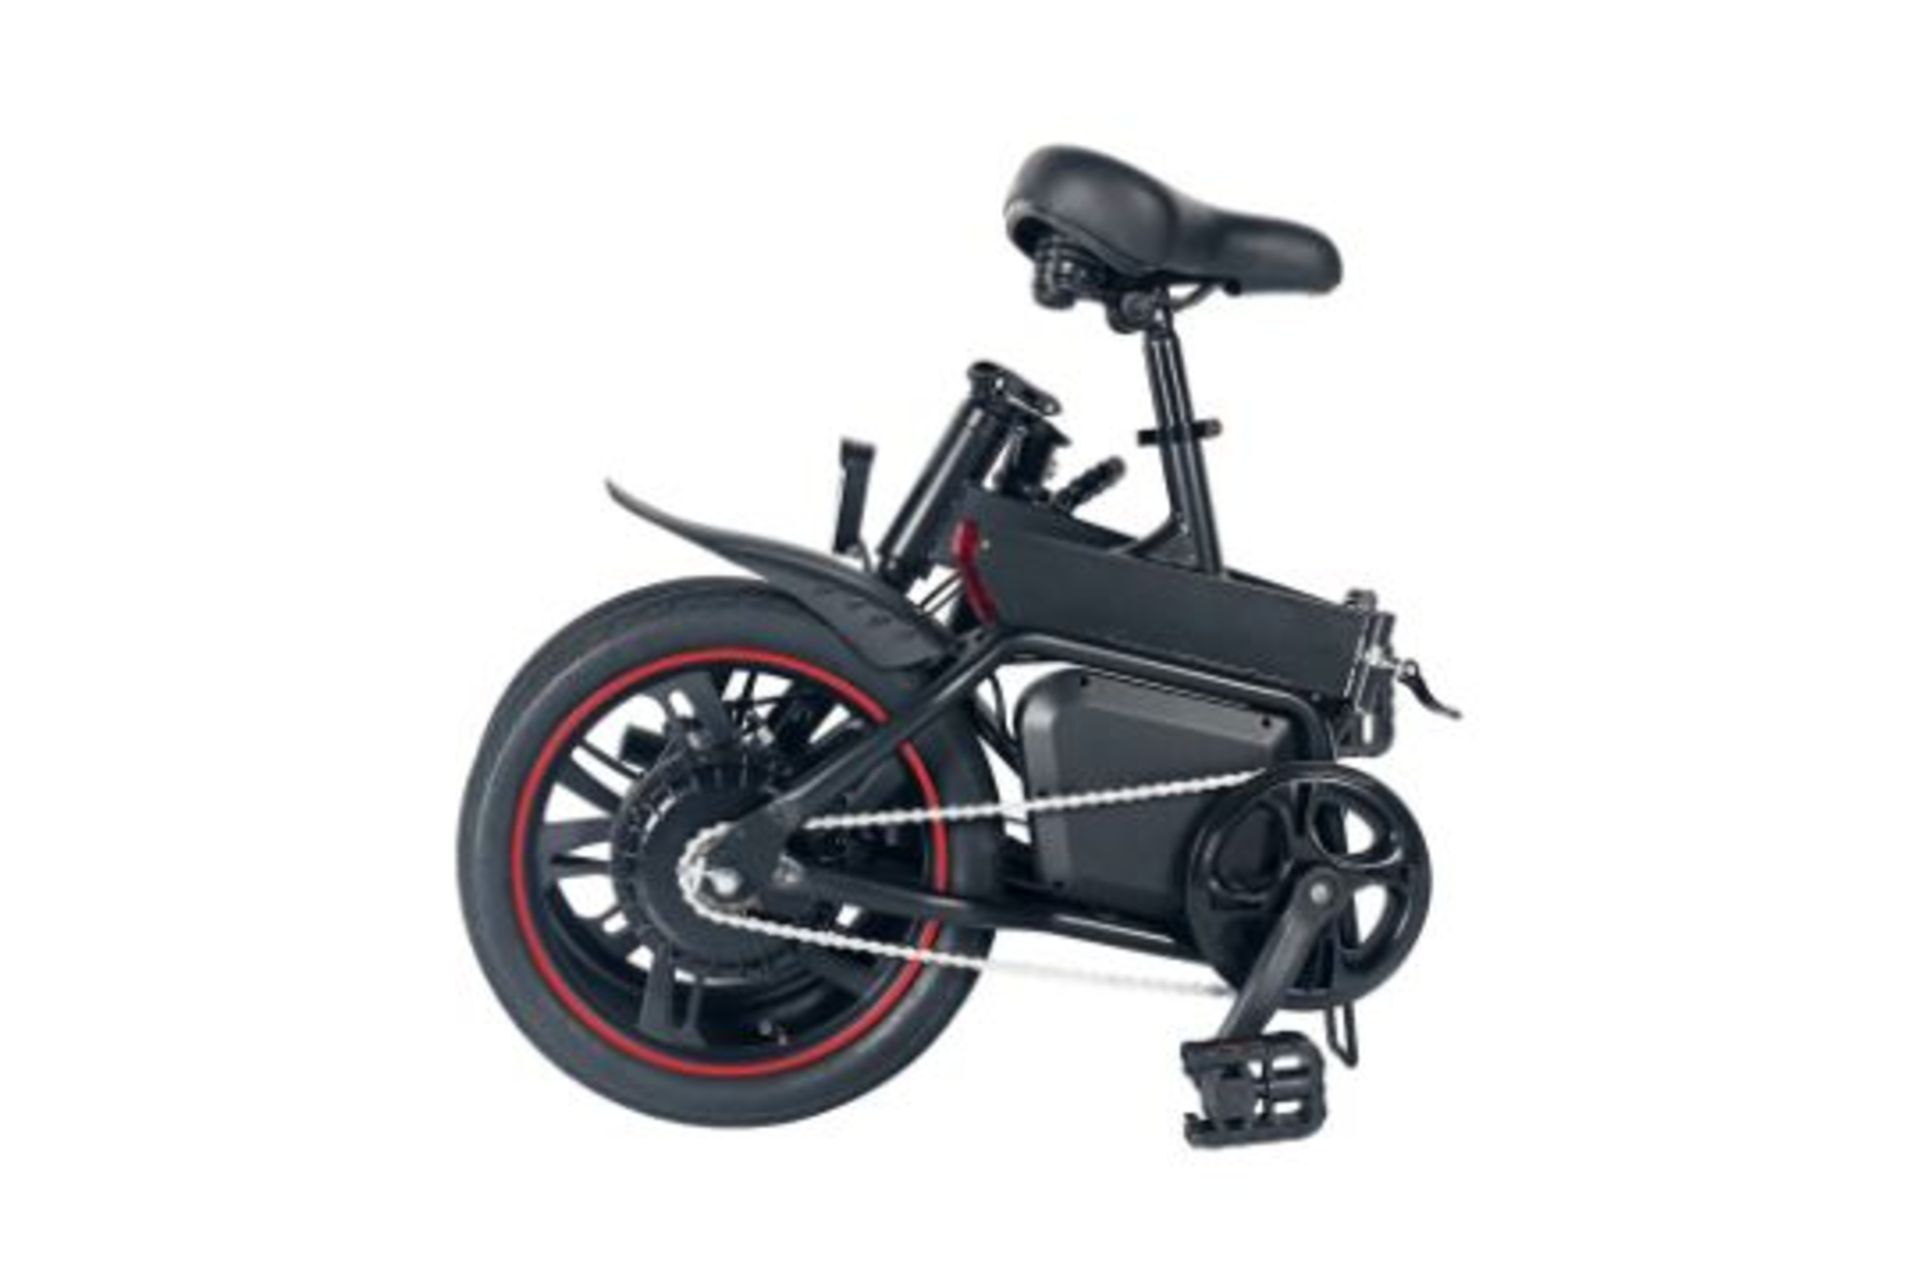 5 X Windgoo B20 Pro Electric Bike. RRP £1,100.99. With 16-inch-wide tires and a frame of - Image 2 of 3